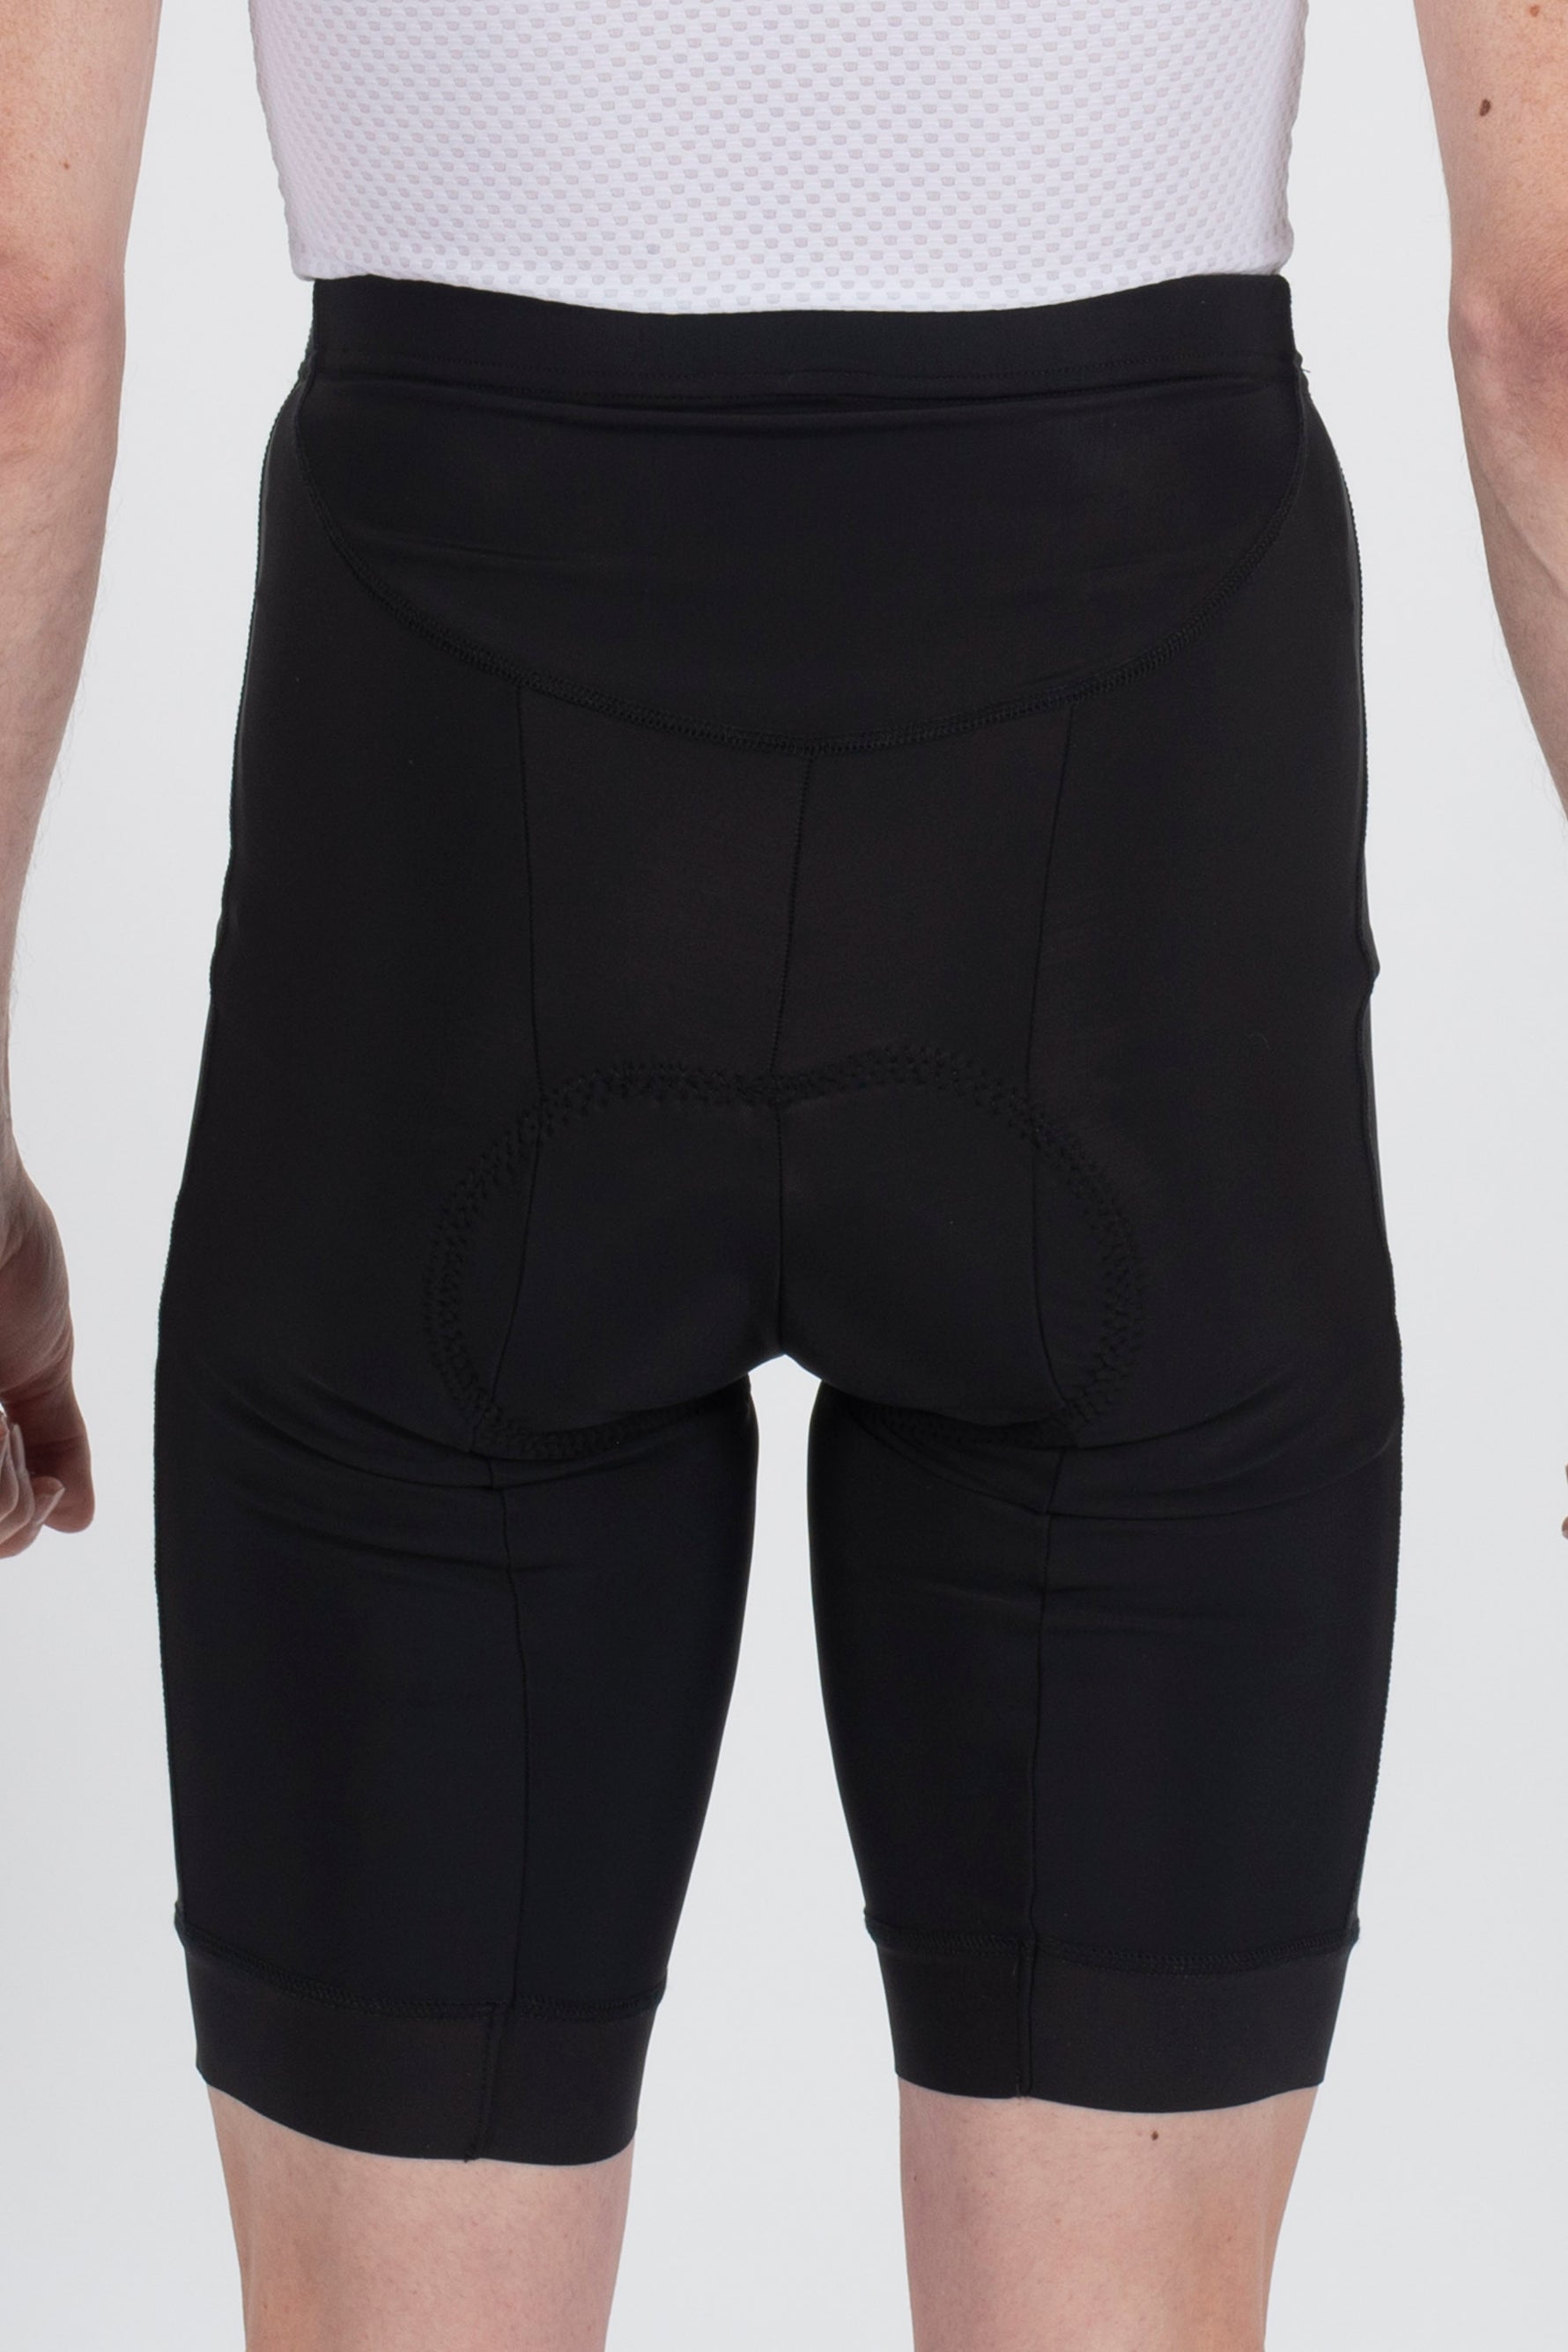 Mens Waist Shorts | Lusso Cycling